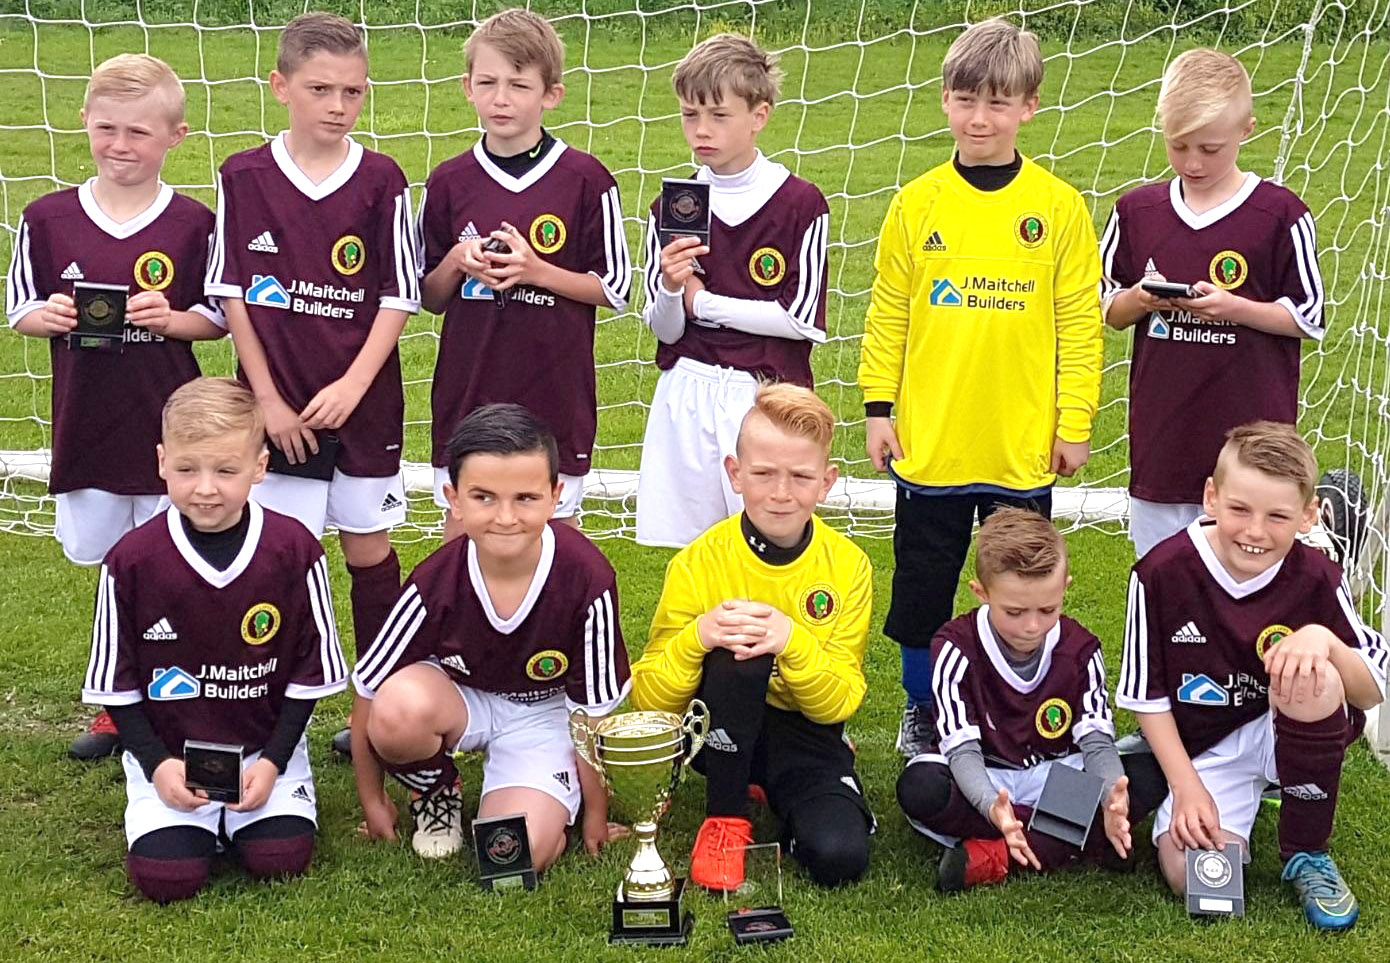 Superb Year for Aycliffe Junior Teams